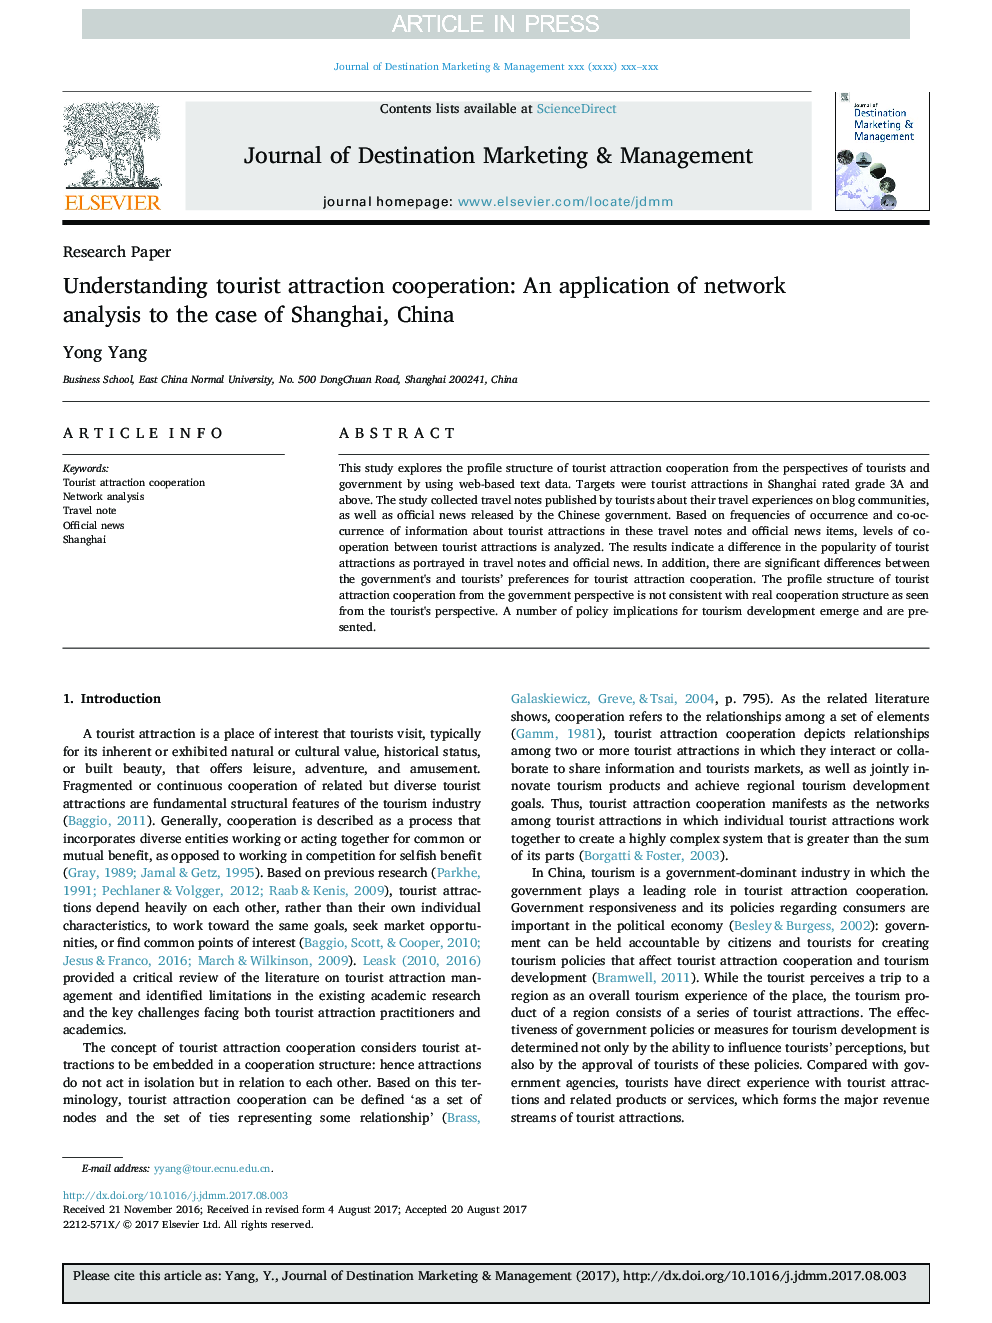 Understanding tourist attraction cooperation: An application of network analysis to the case of Shanghai, China